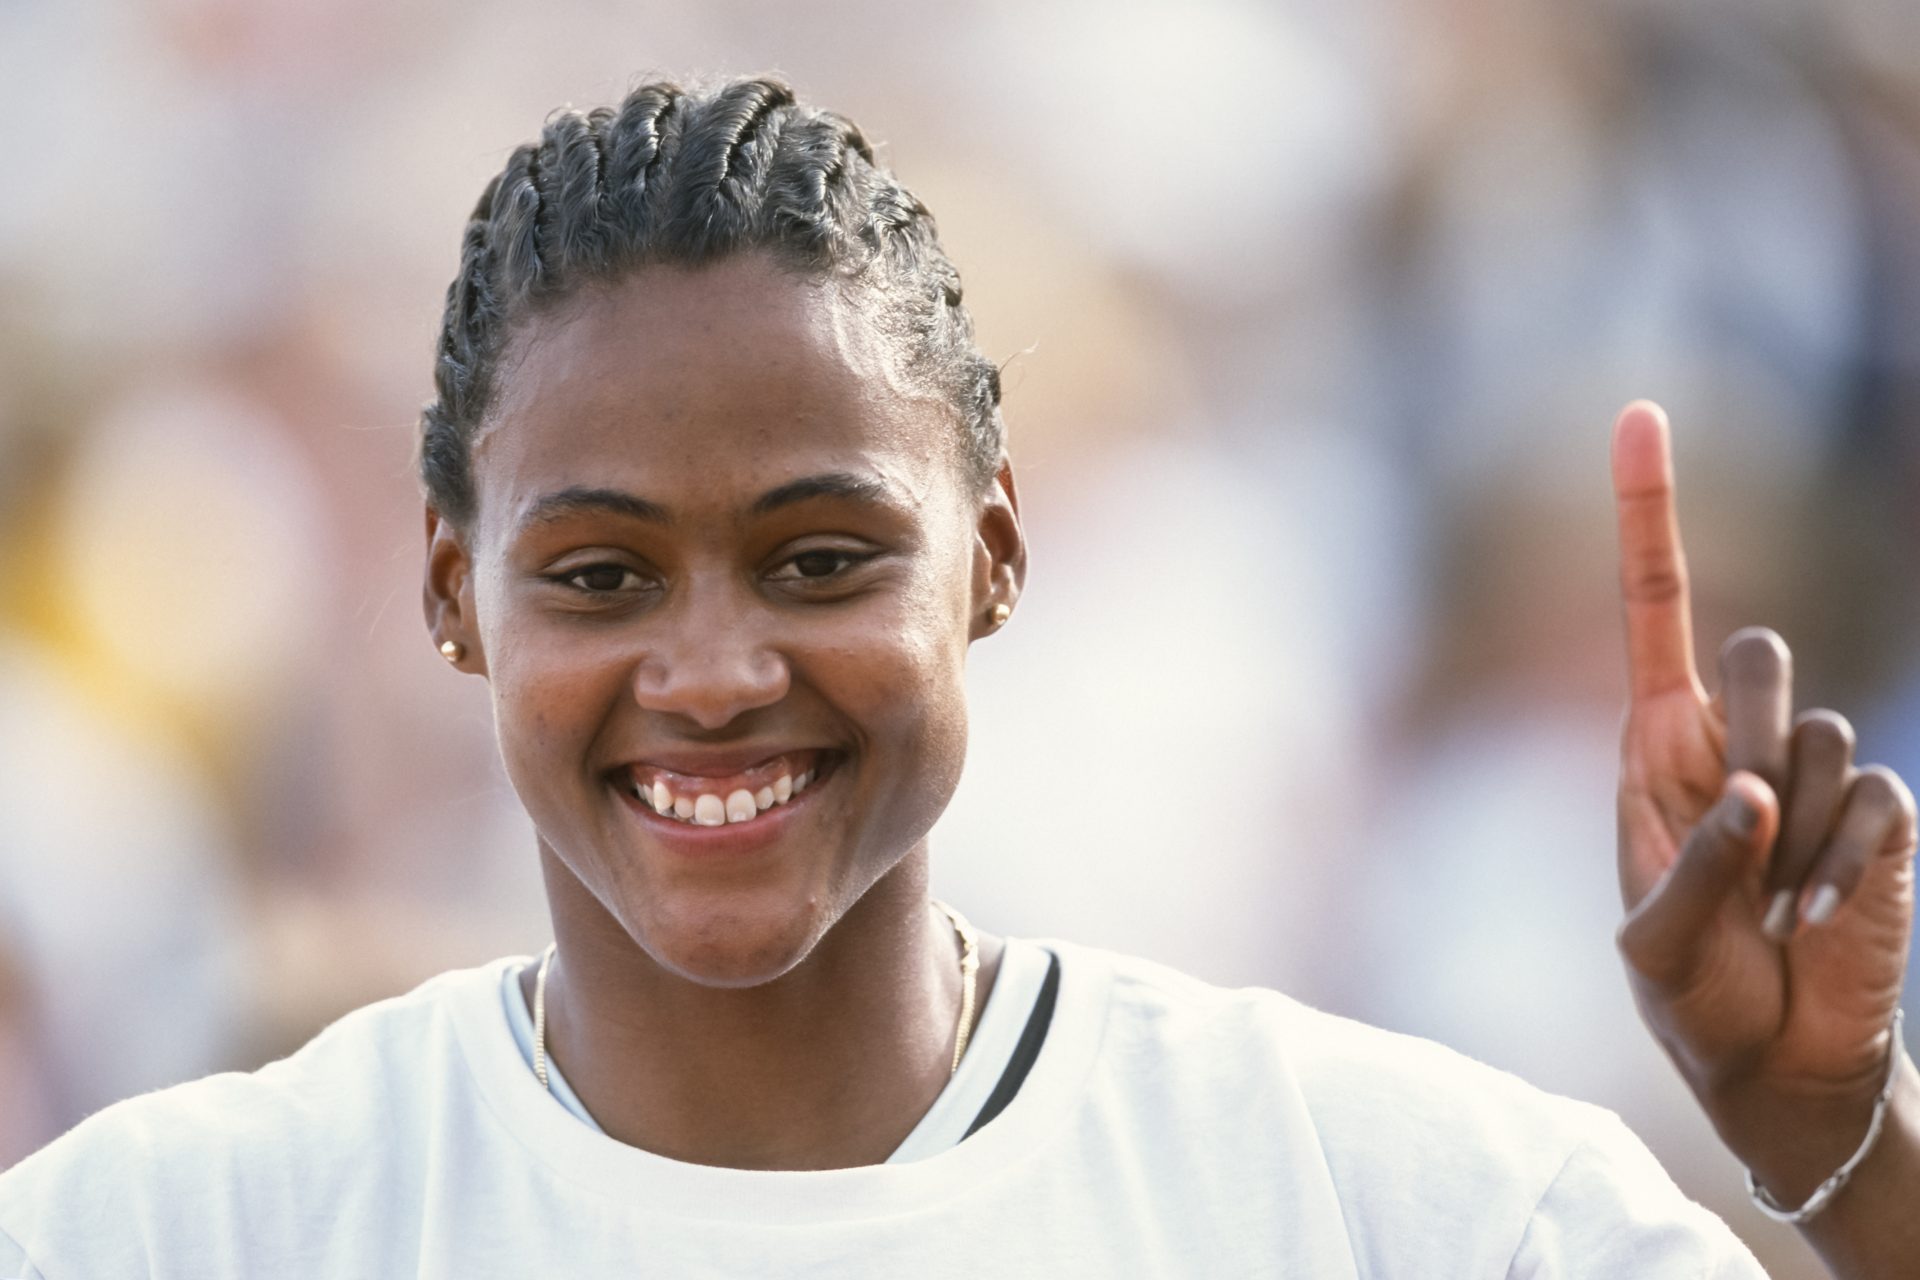 Marion Jones: The tragic downfall of an Olympic champion